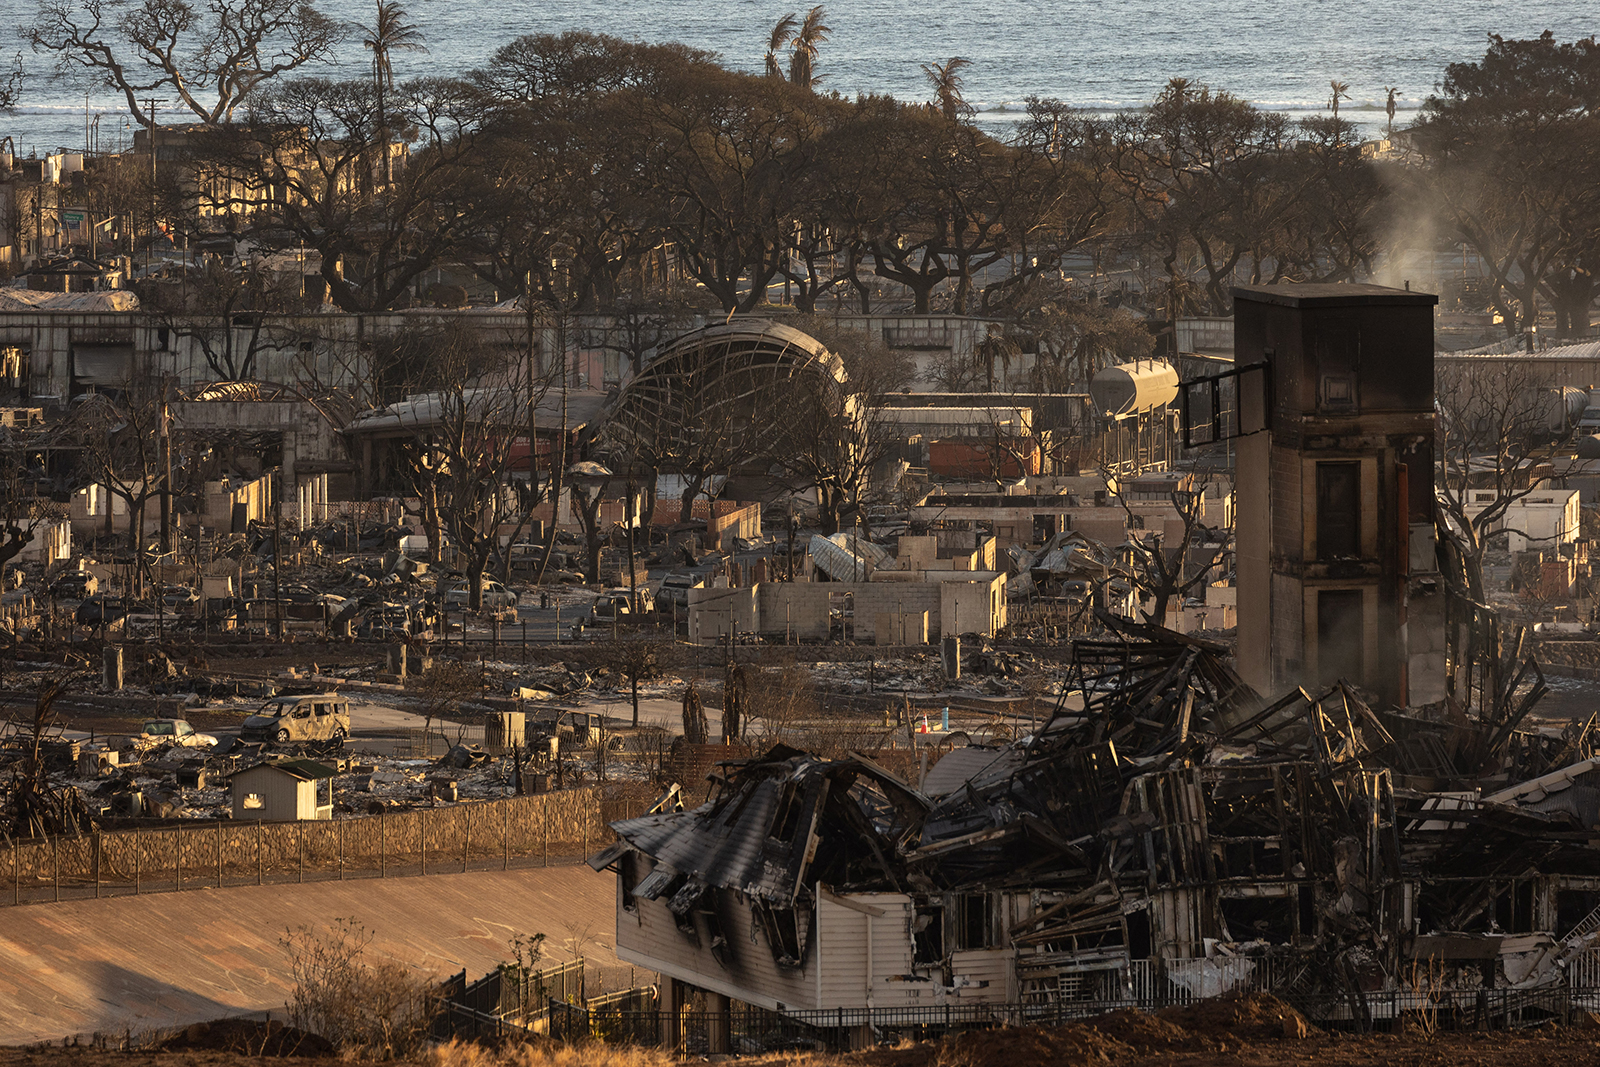 Burned houses and buildings are pictured in the aftermath of a wildfire, in Lahaina, western Maui, Hawaii on August 12.